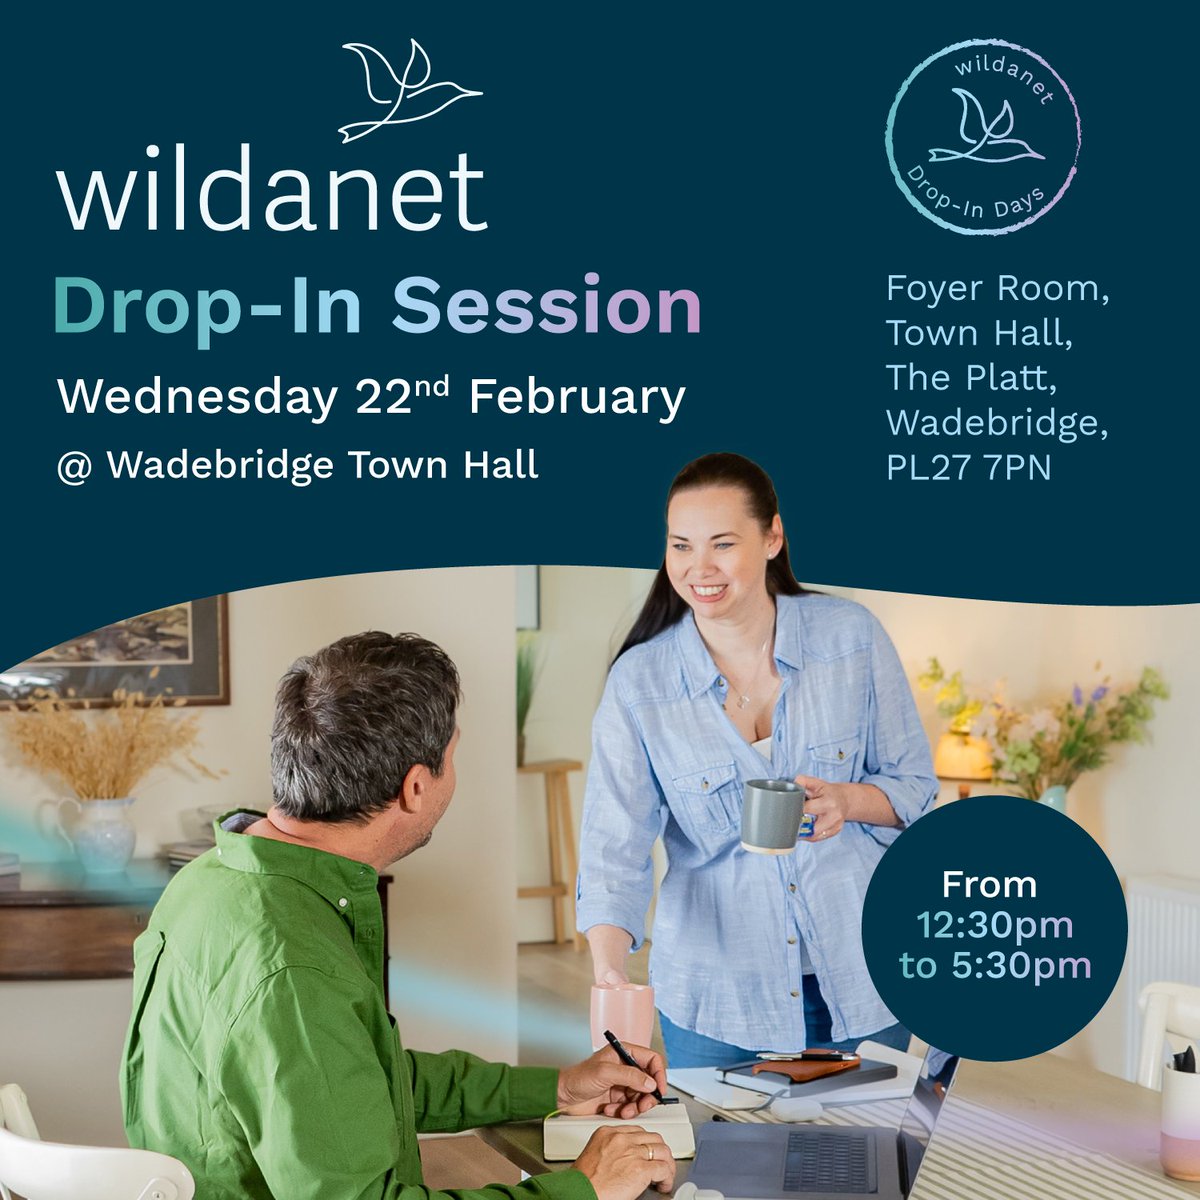 We will be back in Wadebridge for a drop-in session this Wednesday, 22nd February in Wadebridge Town Hall in the Foyer Room from 12:30pm - 5:30pm. Come along to meet our friendly & knowledgeable team & find out more about some of the fantastic early bird offers!